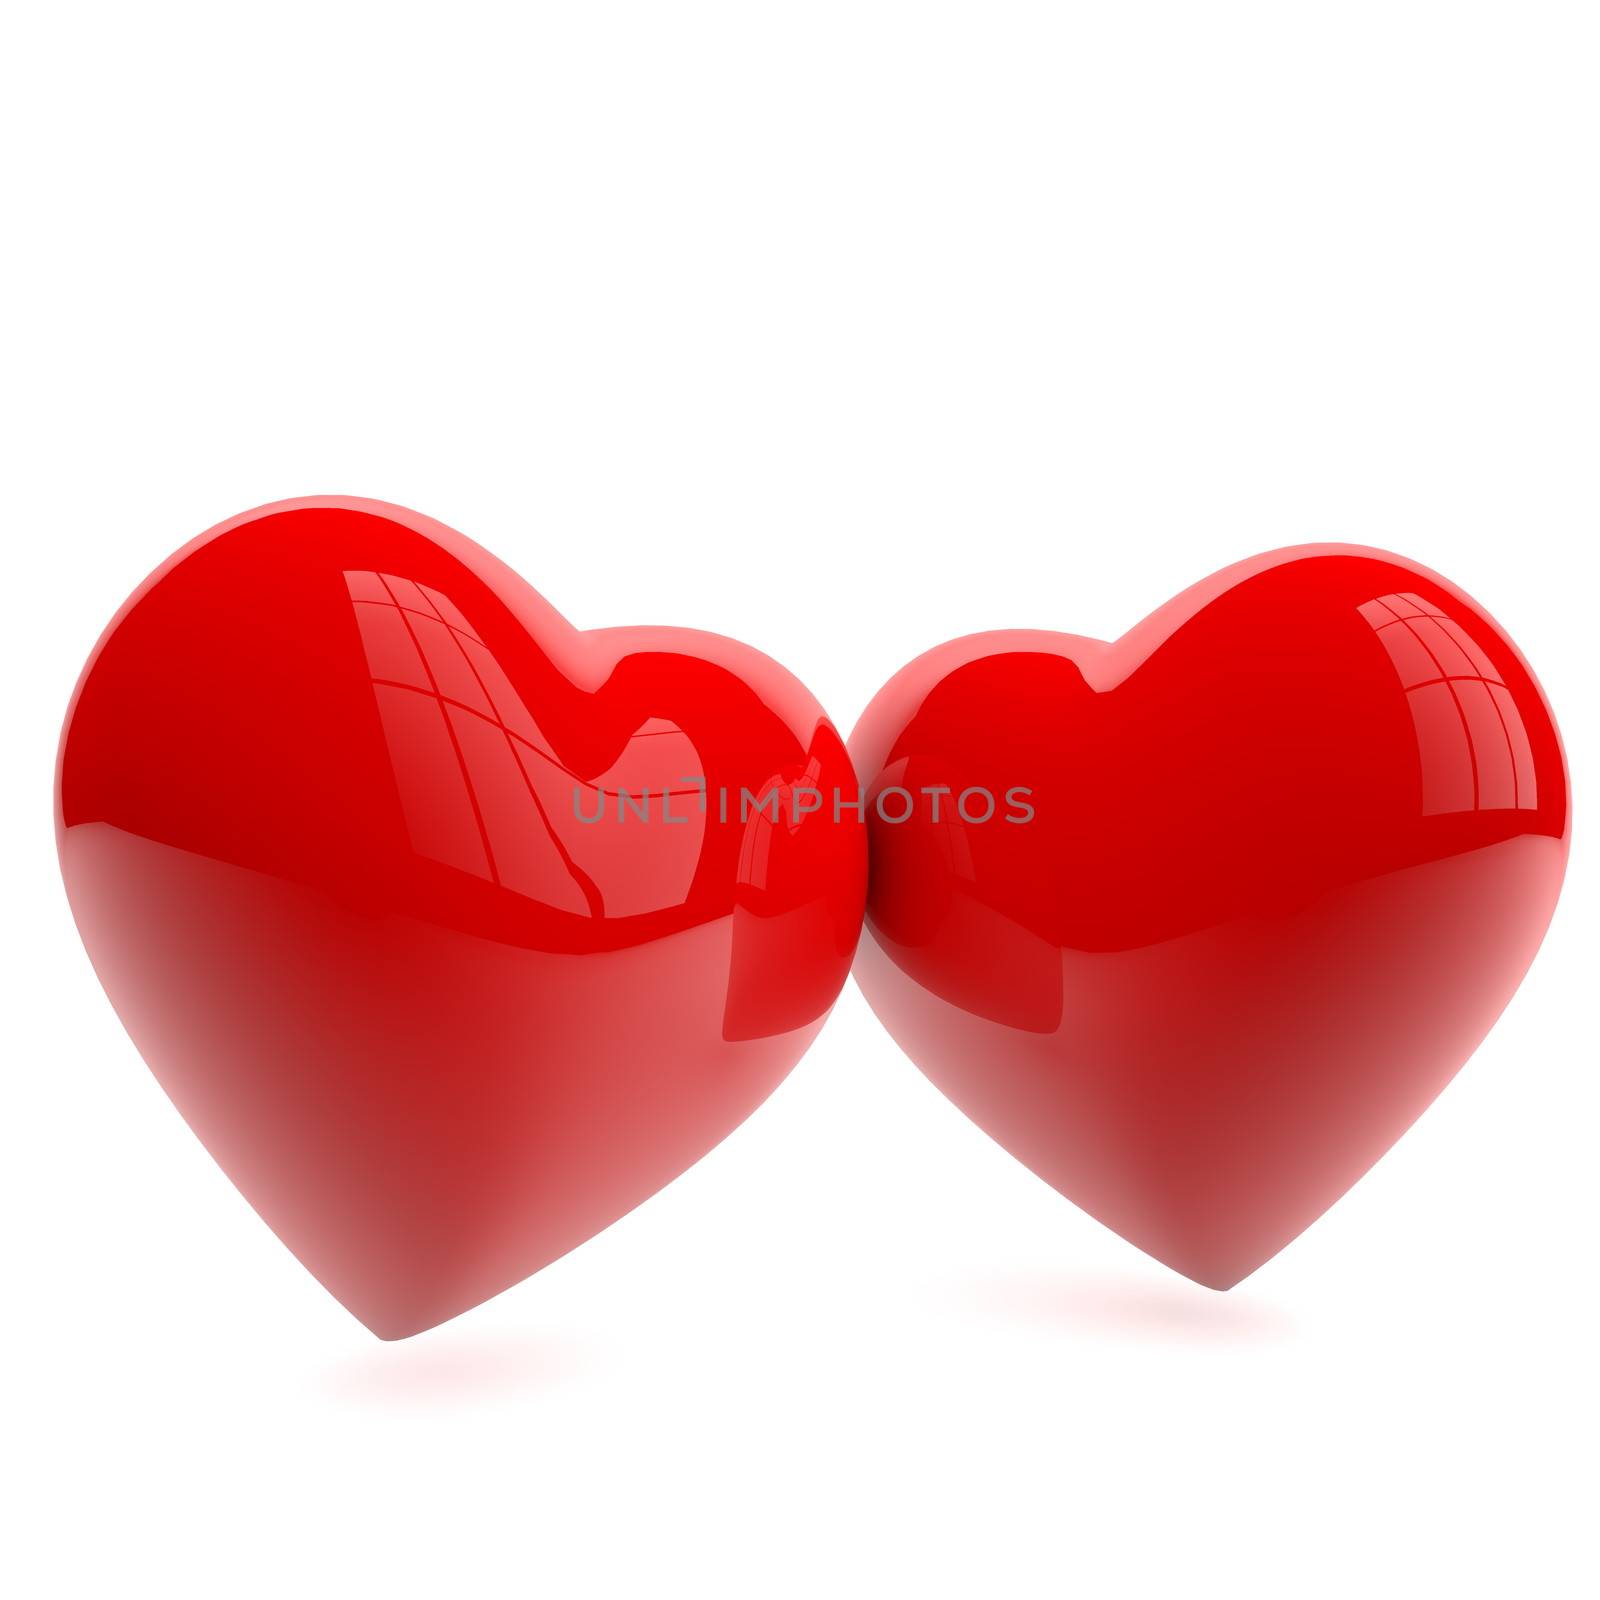 Two red hearts on white